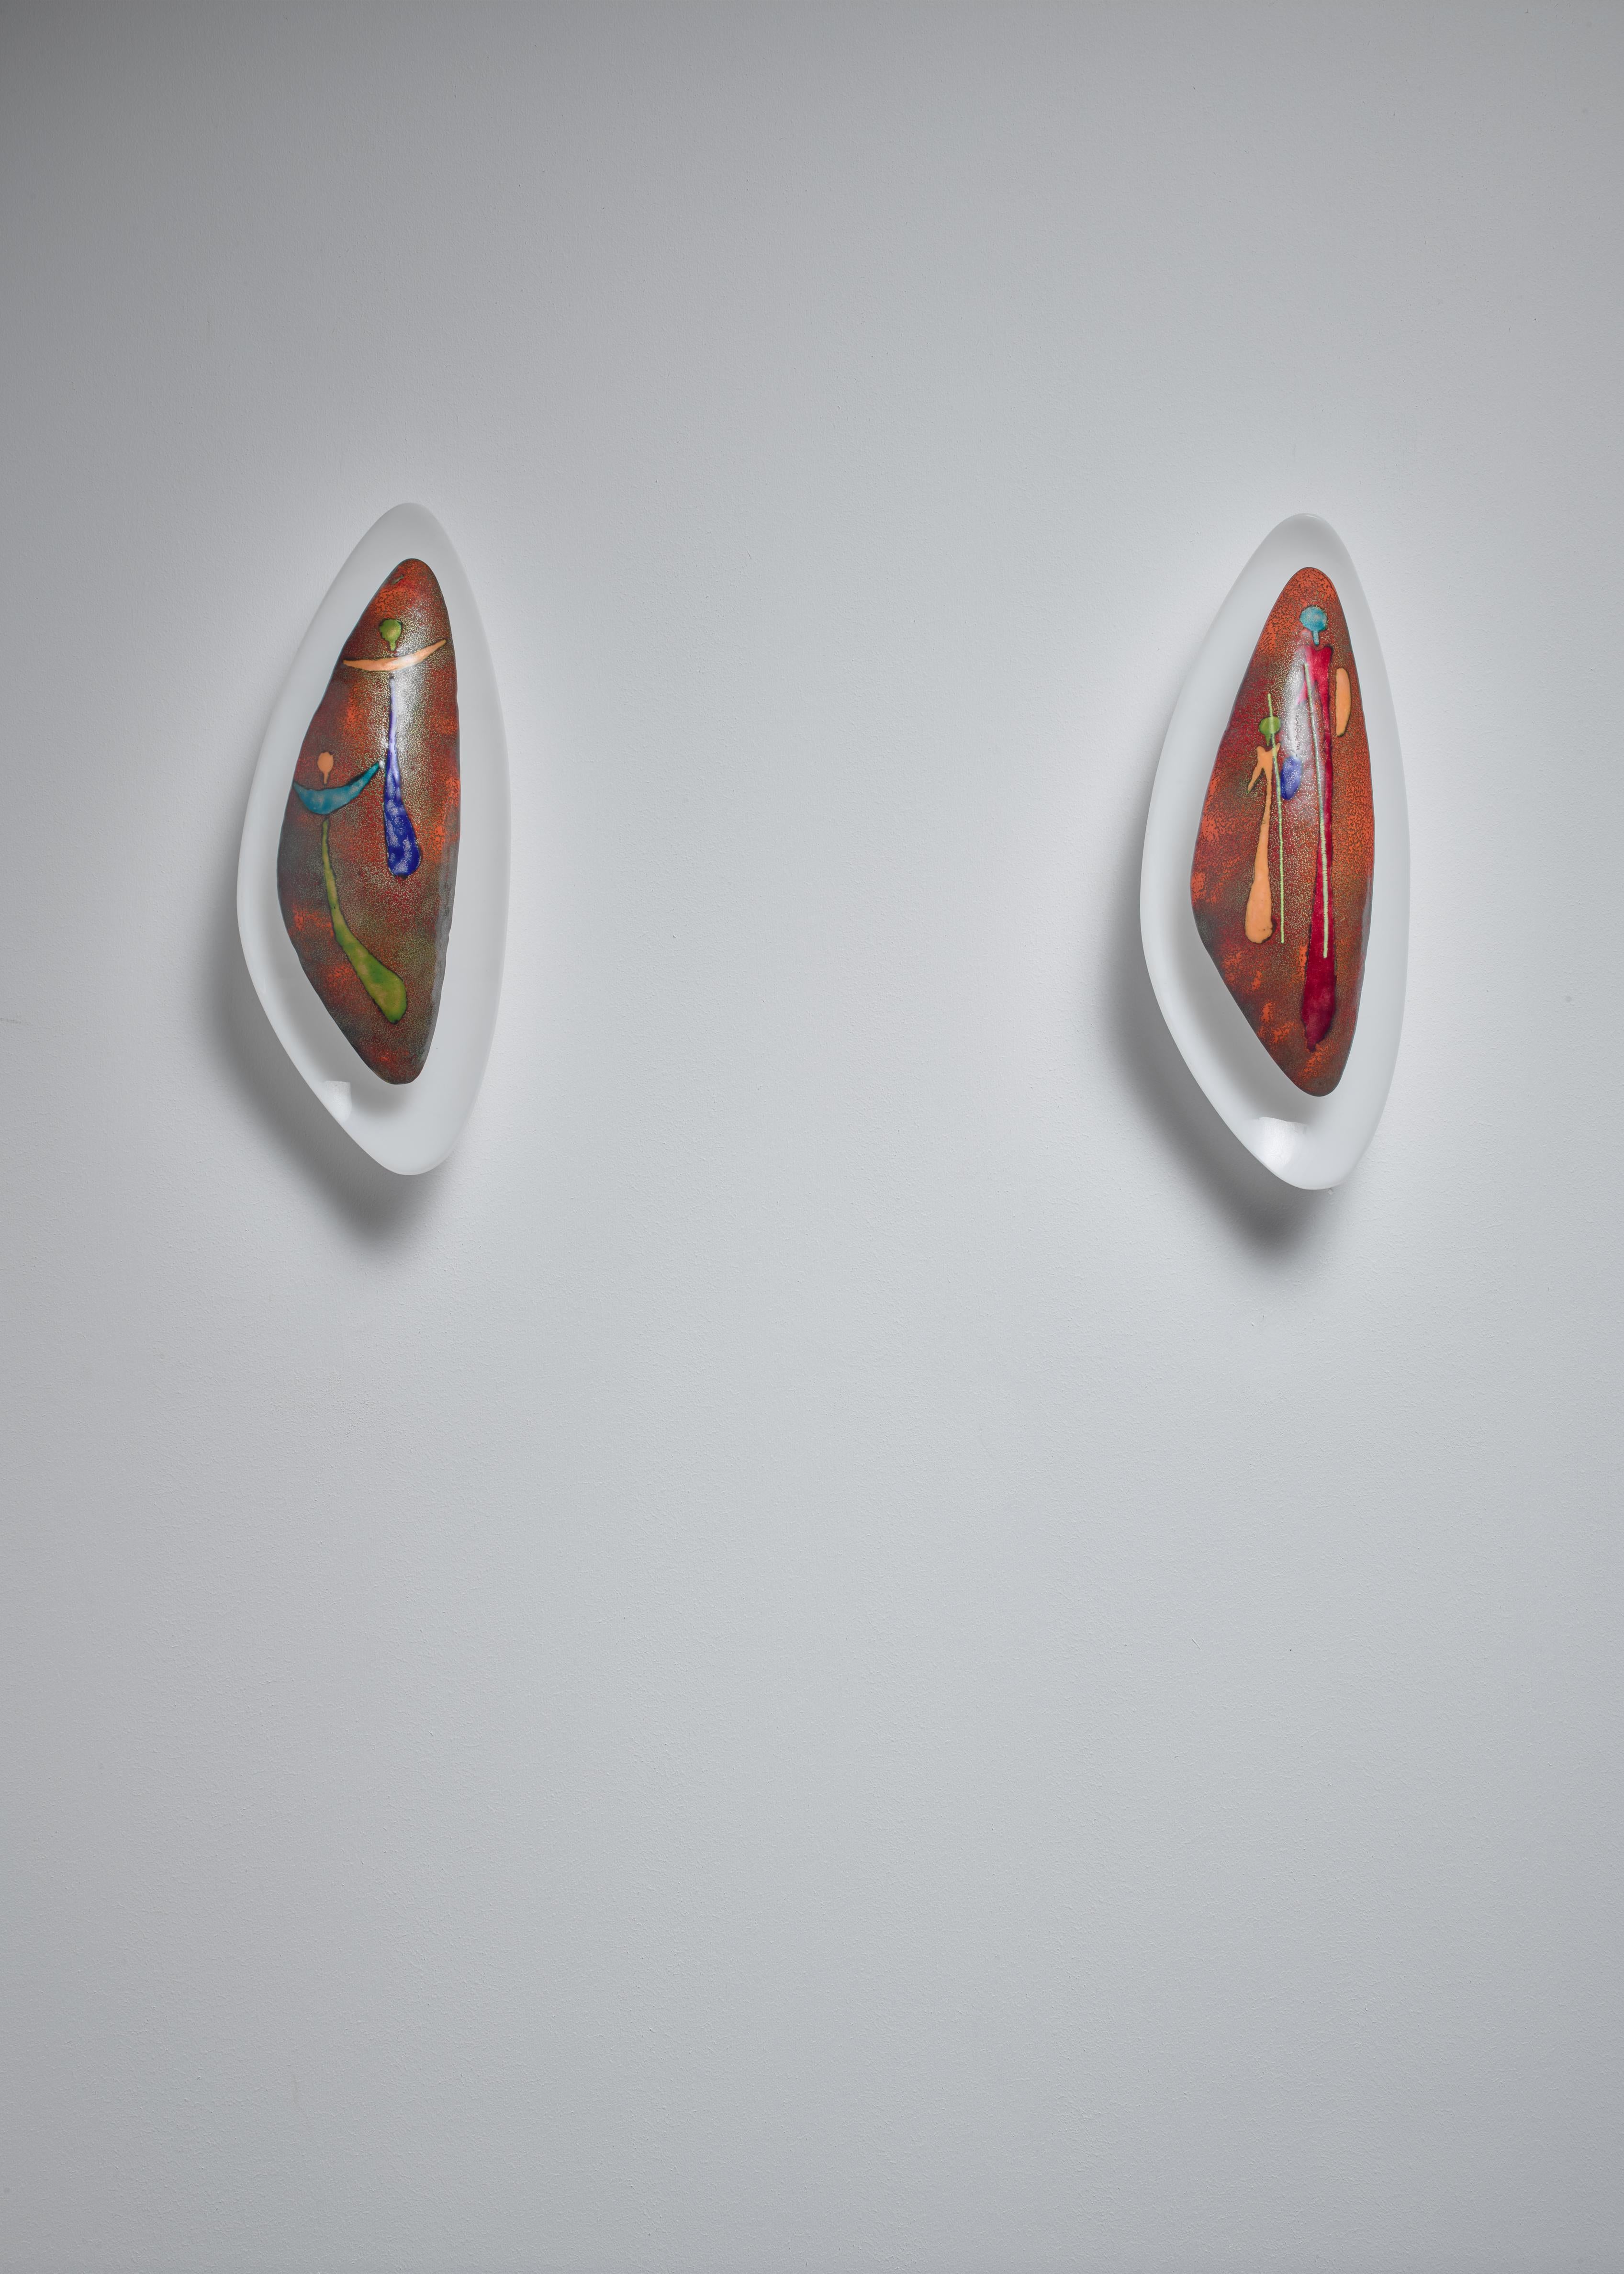 Two handmade Italian wall lamps made out of an old plastic wall-mount and an enameled metal, multicolored shade. The shades show two biblical images from the nativity story: two angels and two of the Kings.